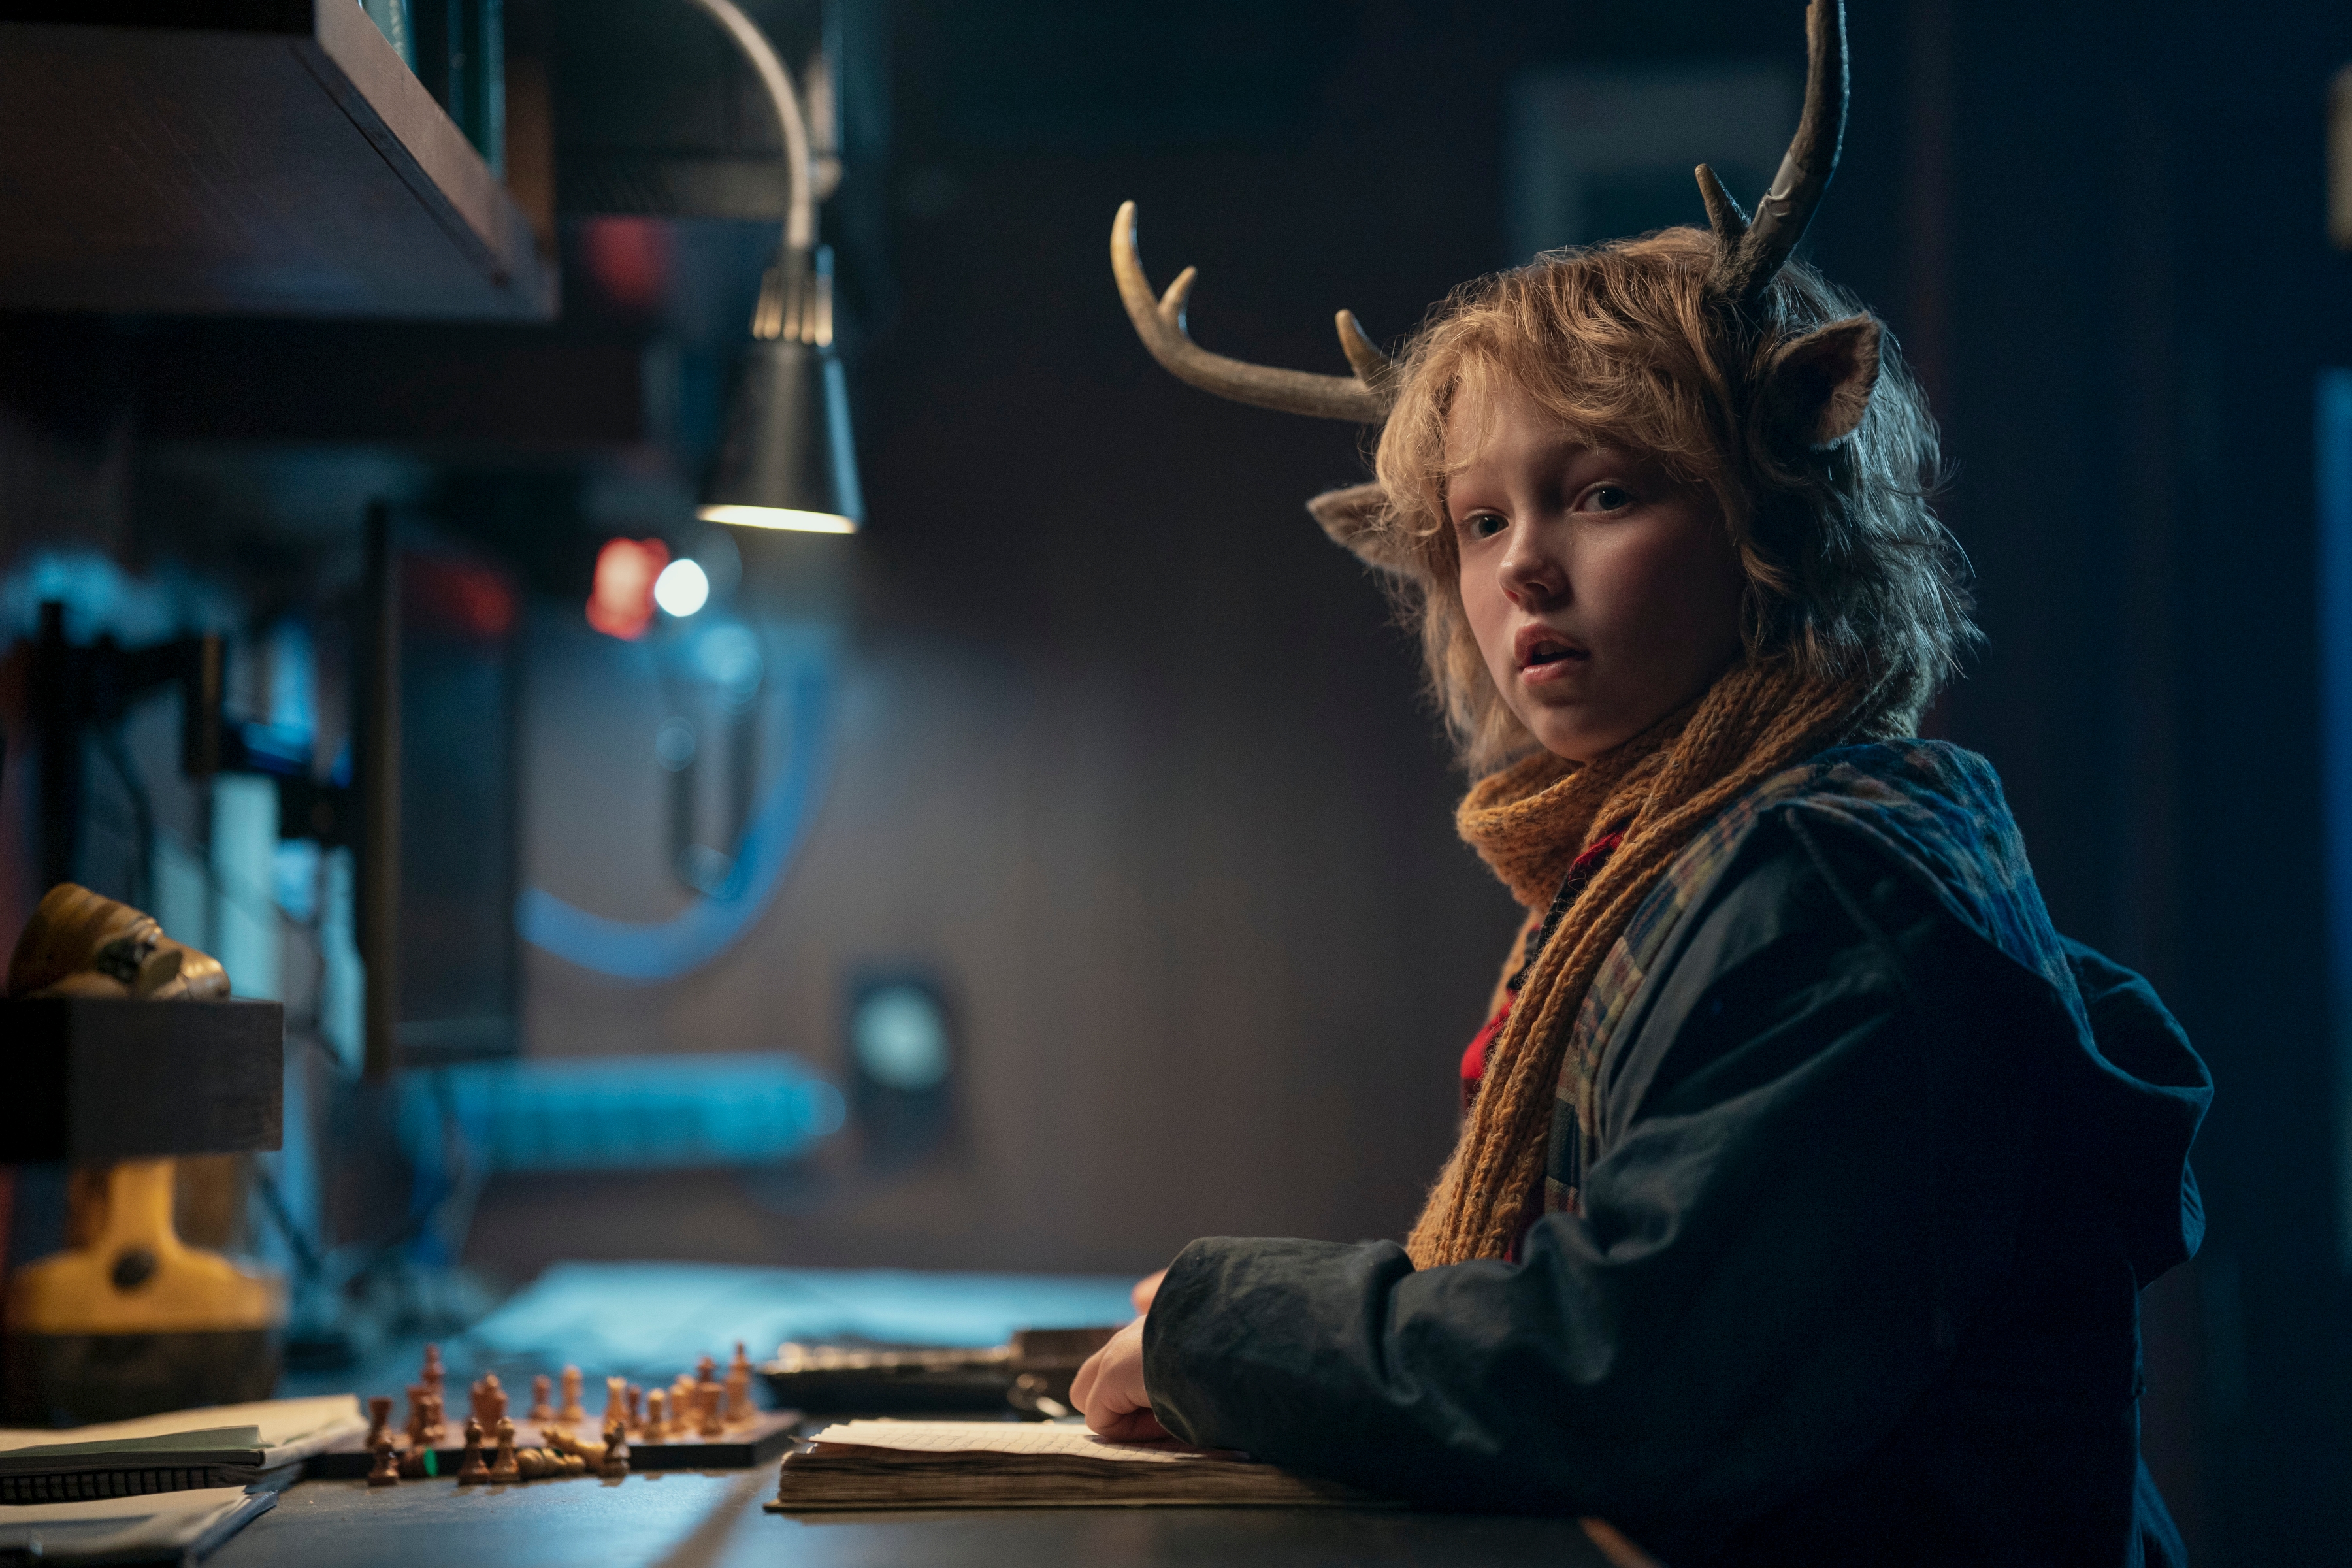 Christian Convery as Gus looks left at the camera while sitting at a desk in Sweet Tooth X3. Gus is a little boy who is dressed warmly, has a shaggy blonde mop, and the ears and antlers of a deer. 